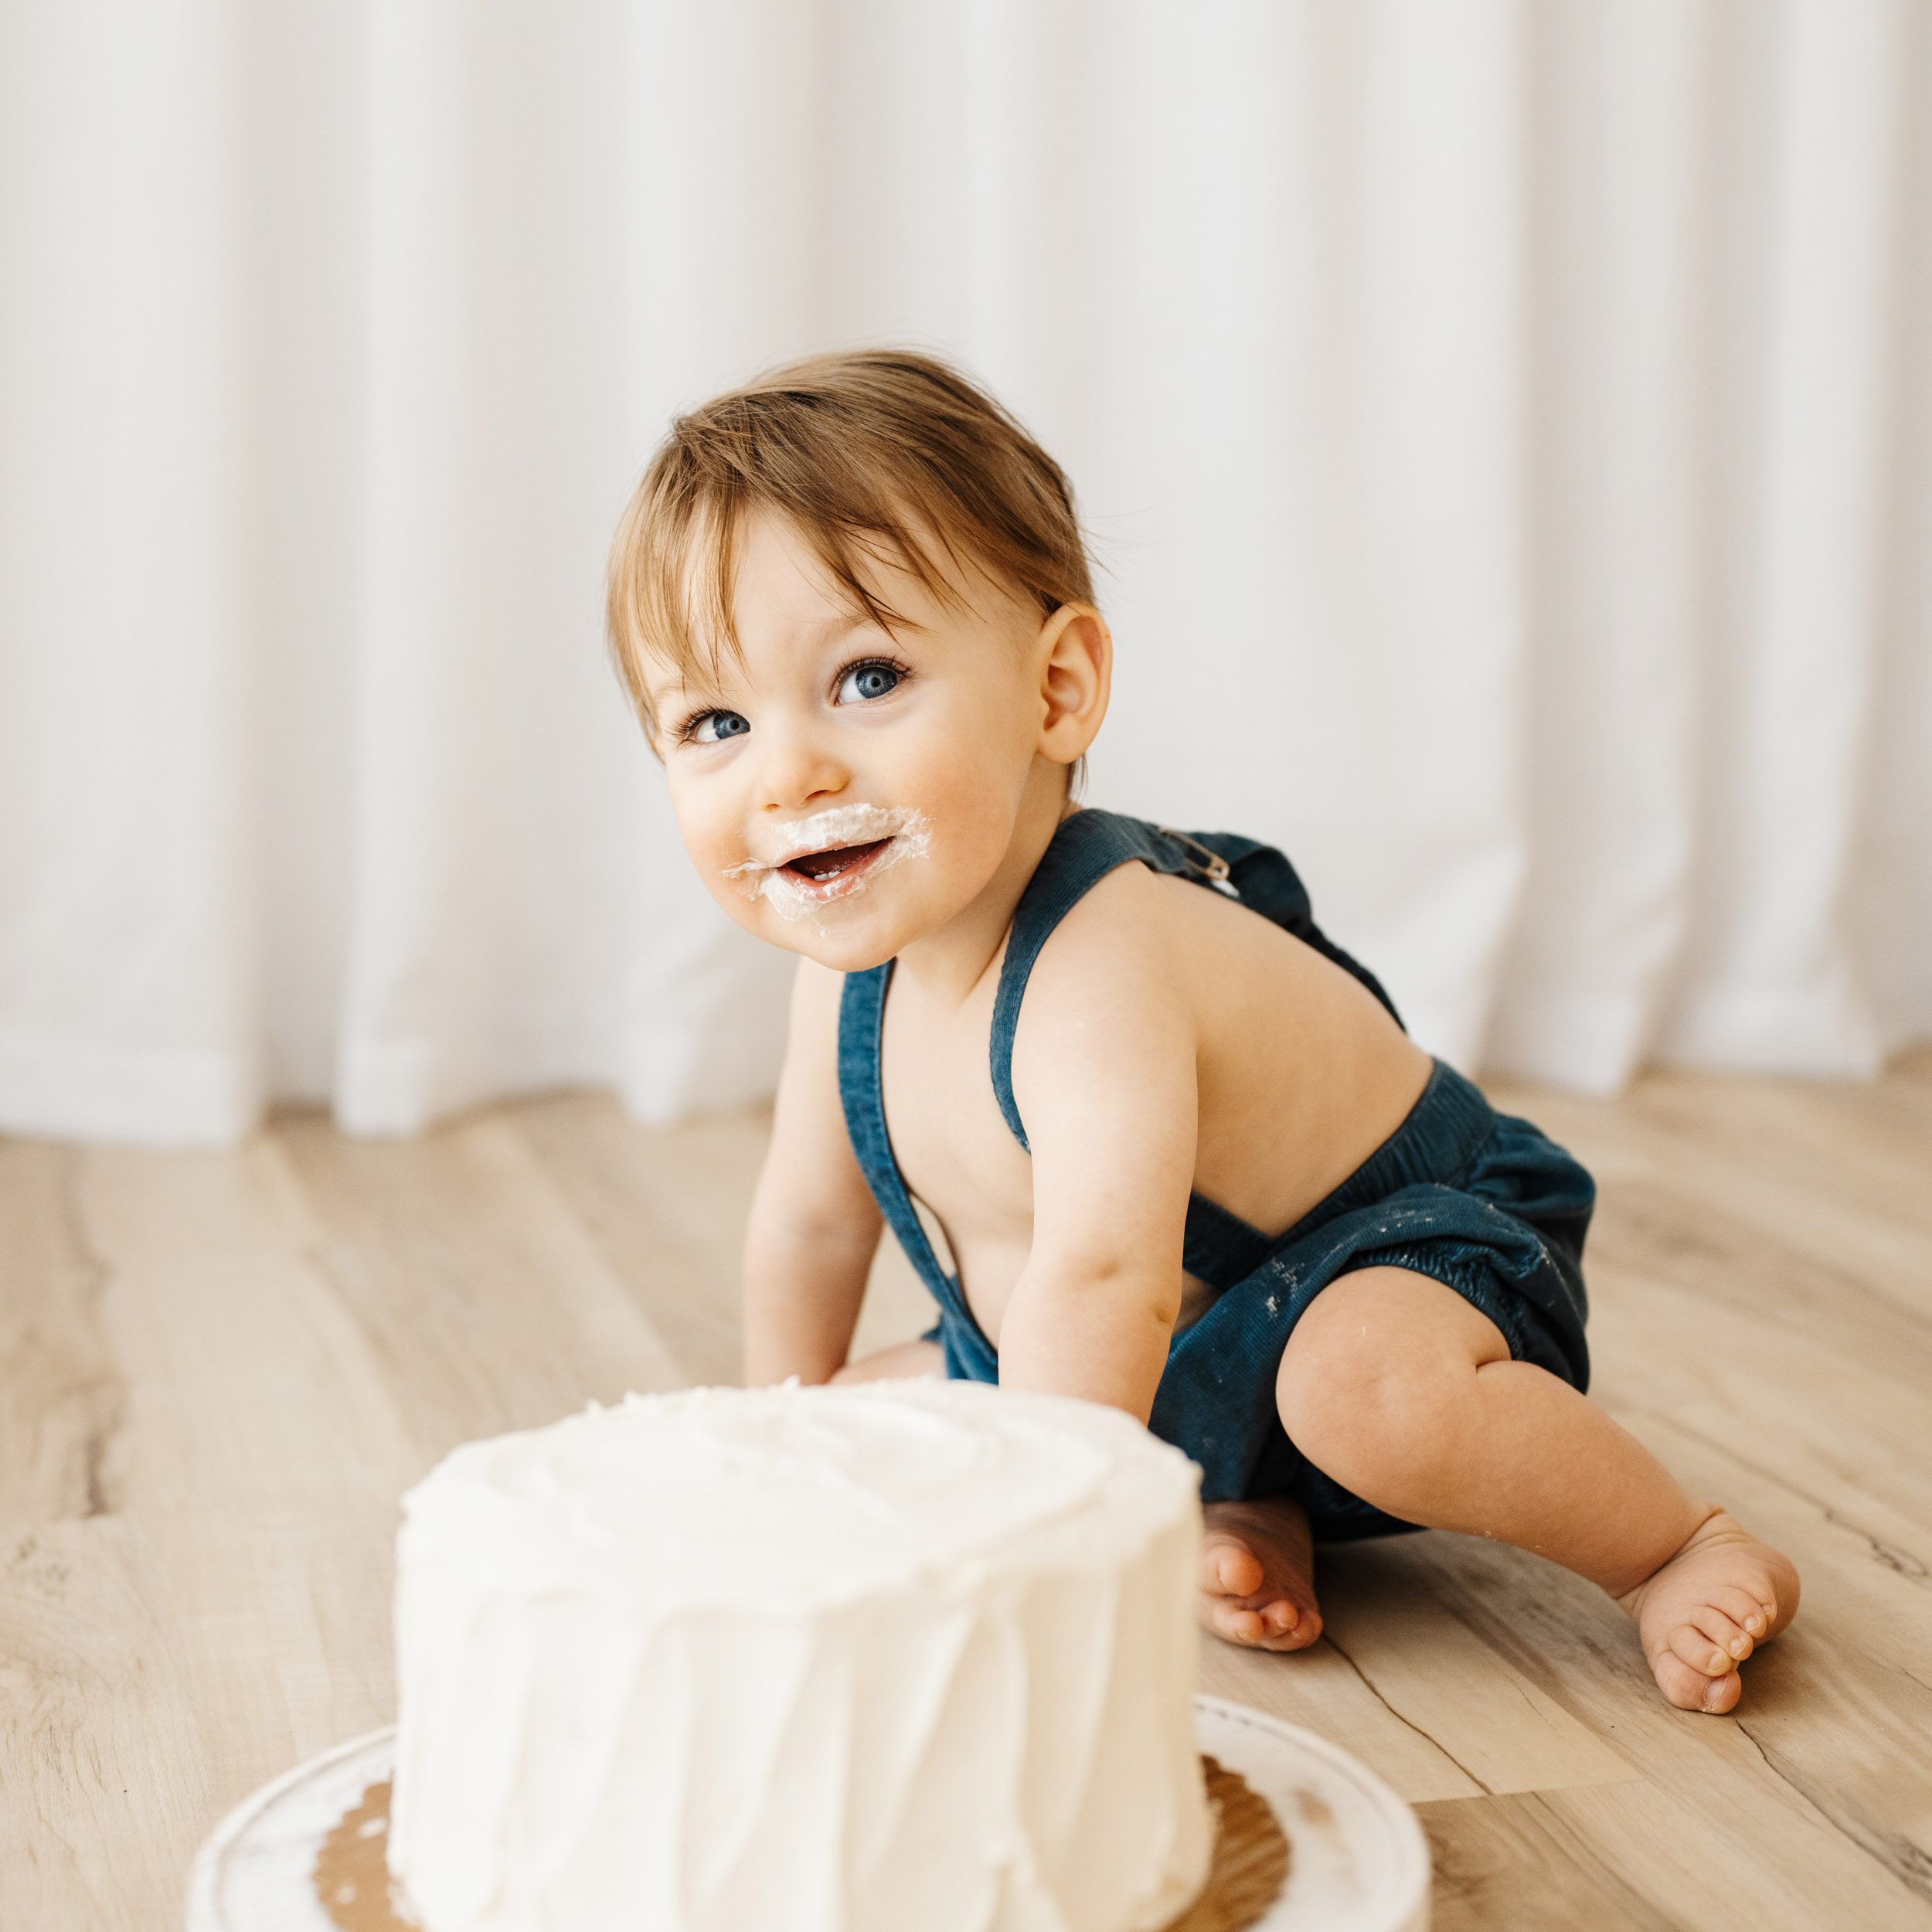 a young boy sitting on the floor behind a white cake and looking up at his mom behind the camera with a huge smile on his face during a 1st birthday cake smash & splash photoshoot